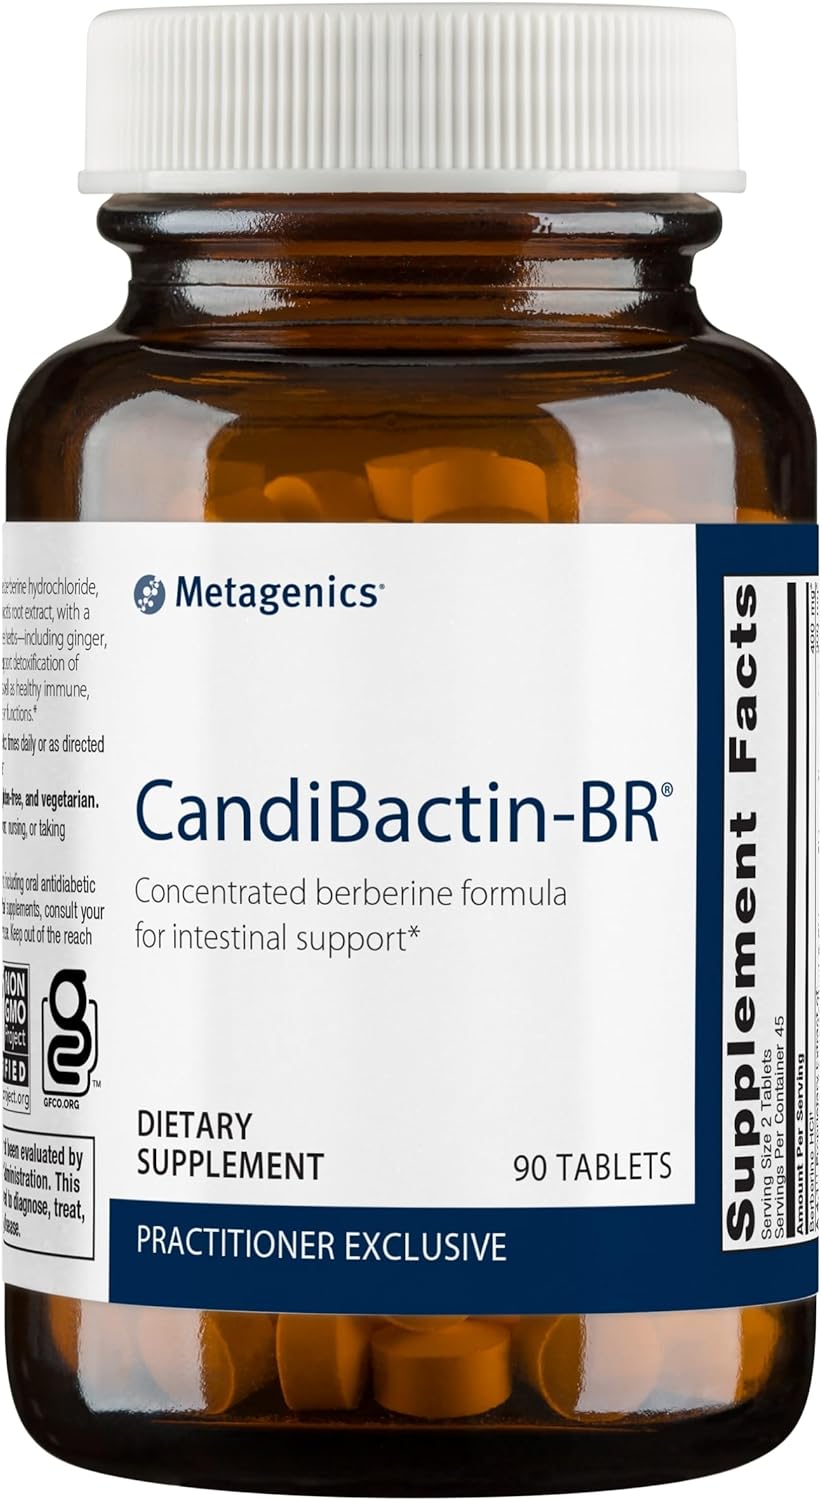 Metagenics CandiBactin-BR - Concentrated Berberine Formula for Healthy